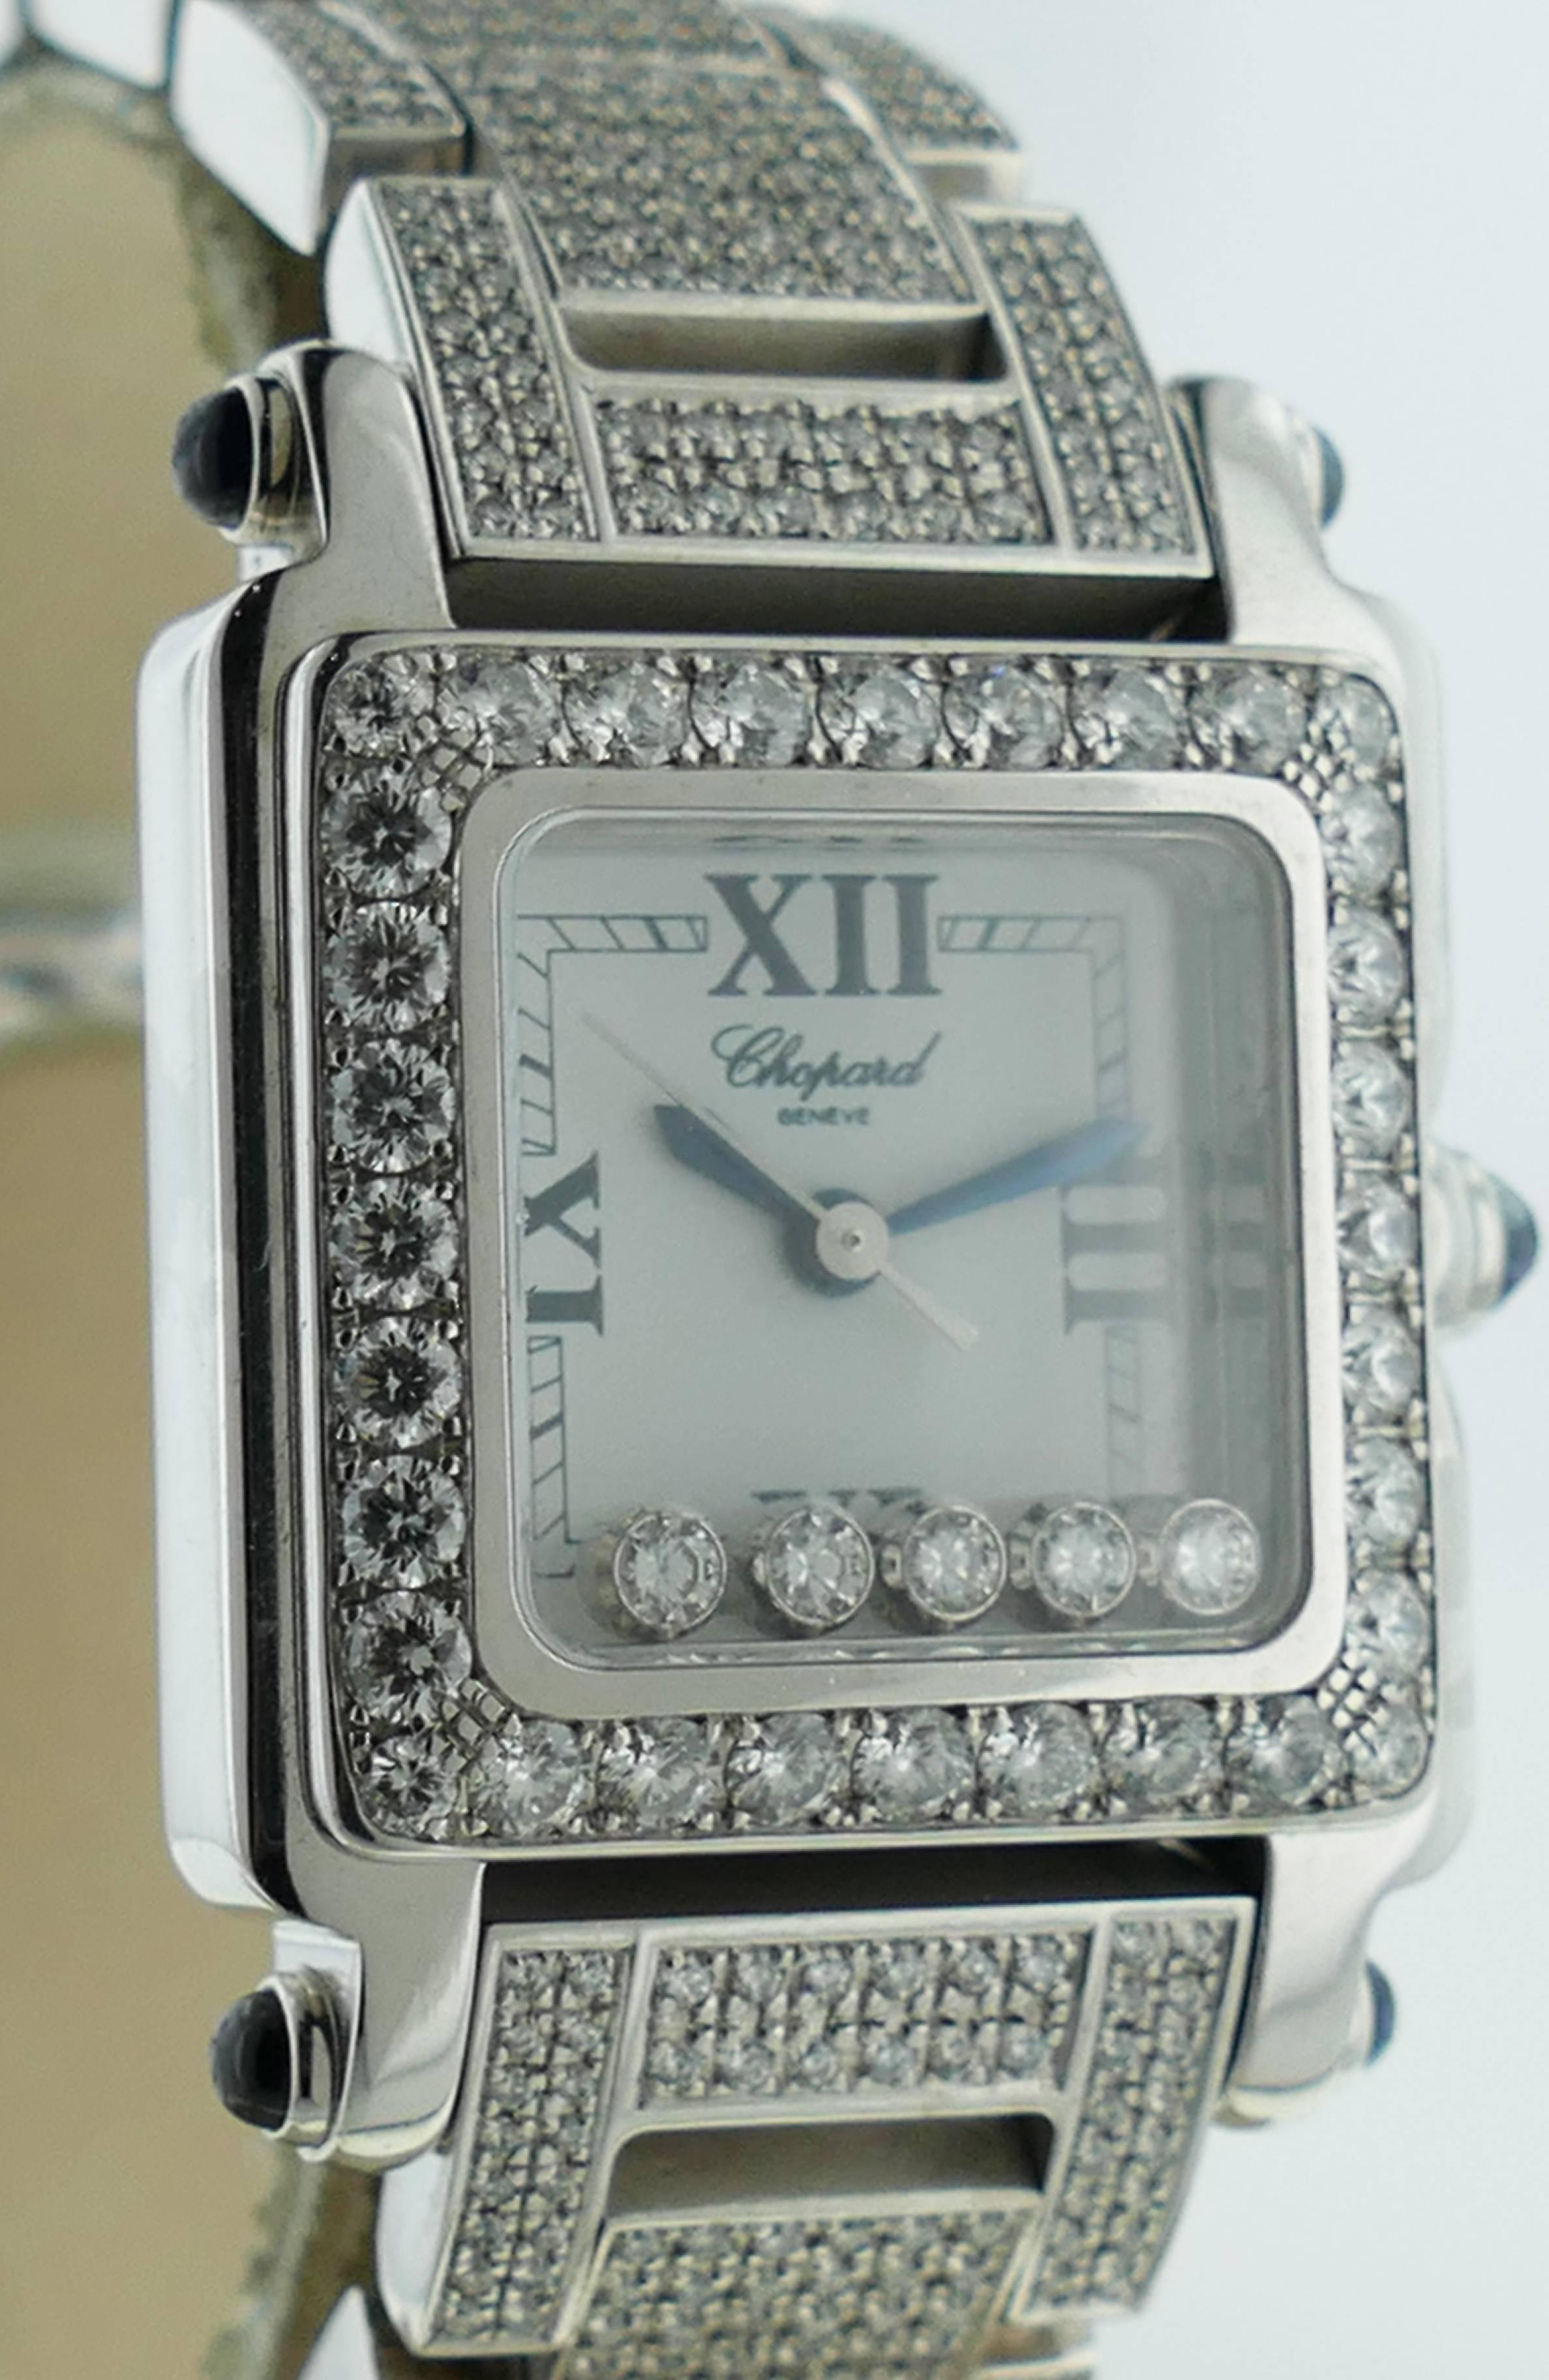  Ladies (23mm) Chopard Happy Sport Factory Diamond Stainless Steel Watch ref 27/8894/23-11 on a 18k White Gold Chopard Bracelet W/ Full Paved Diamonds (Aftermarket). The Watch Is in Good Condition & Keeping Great Time; Movement is Operated by